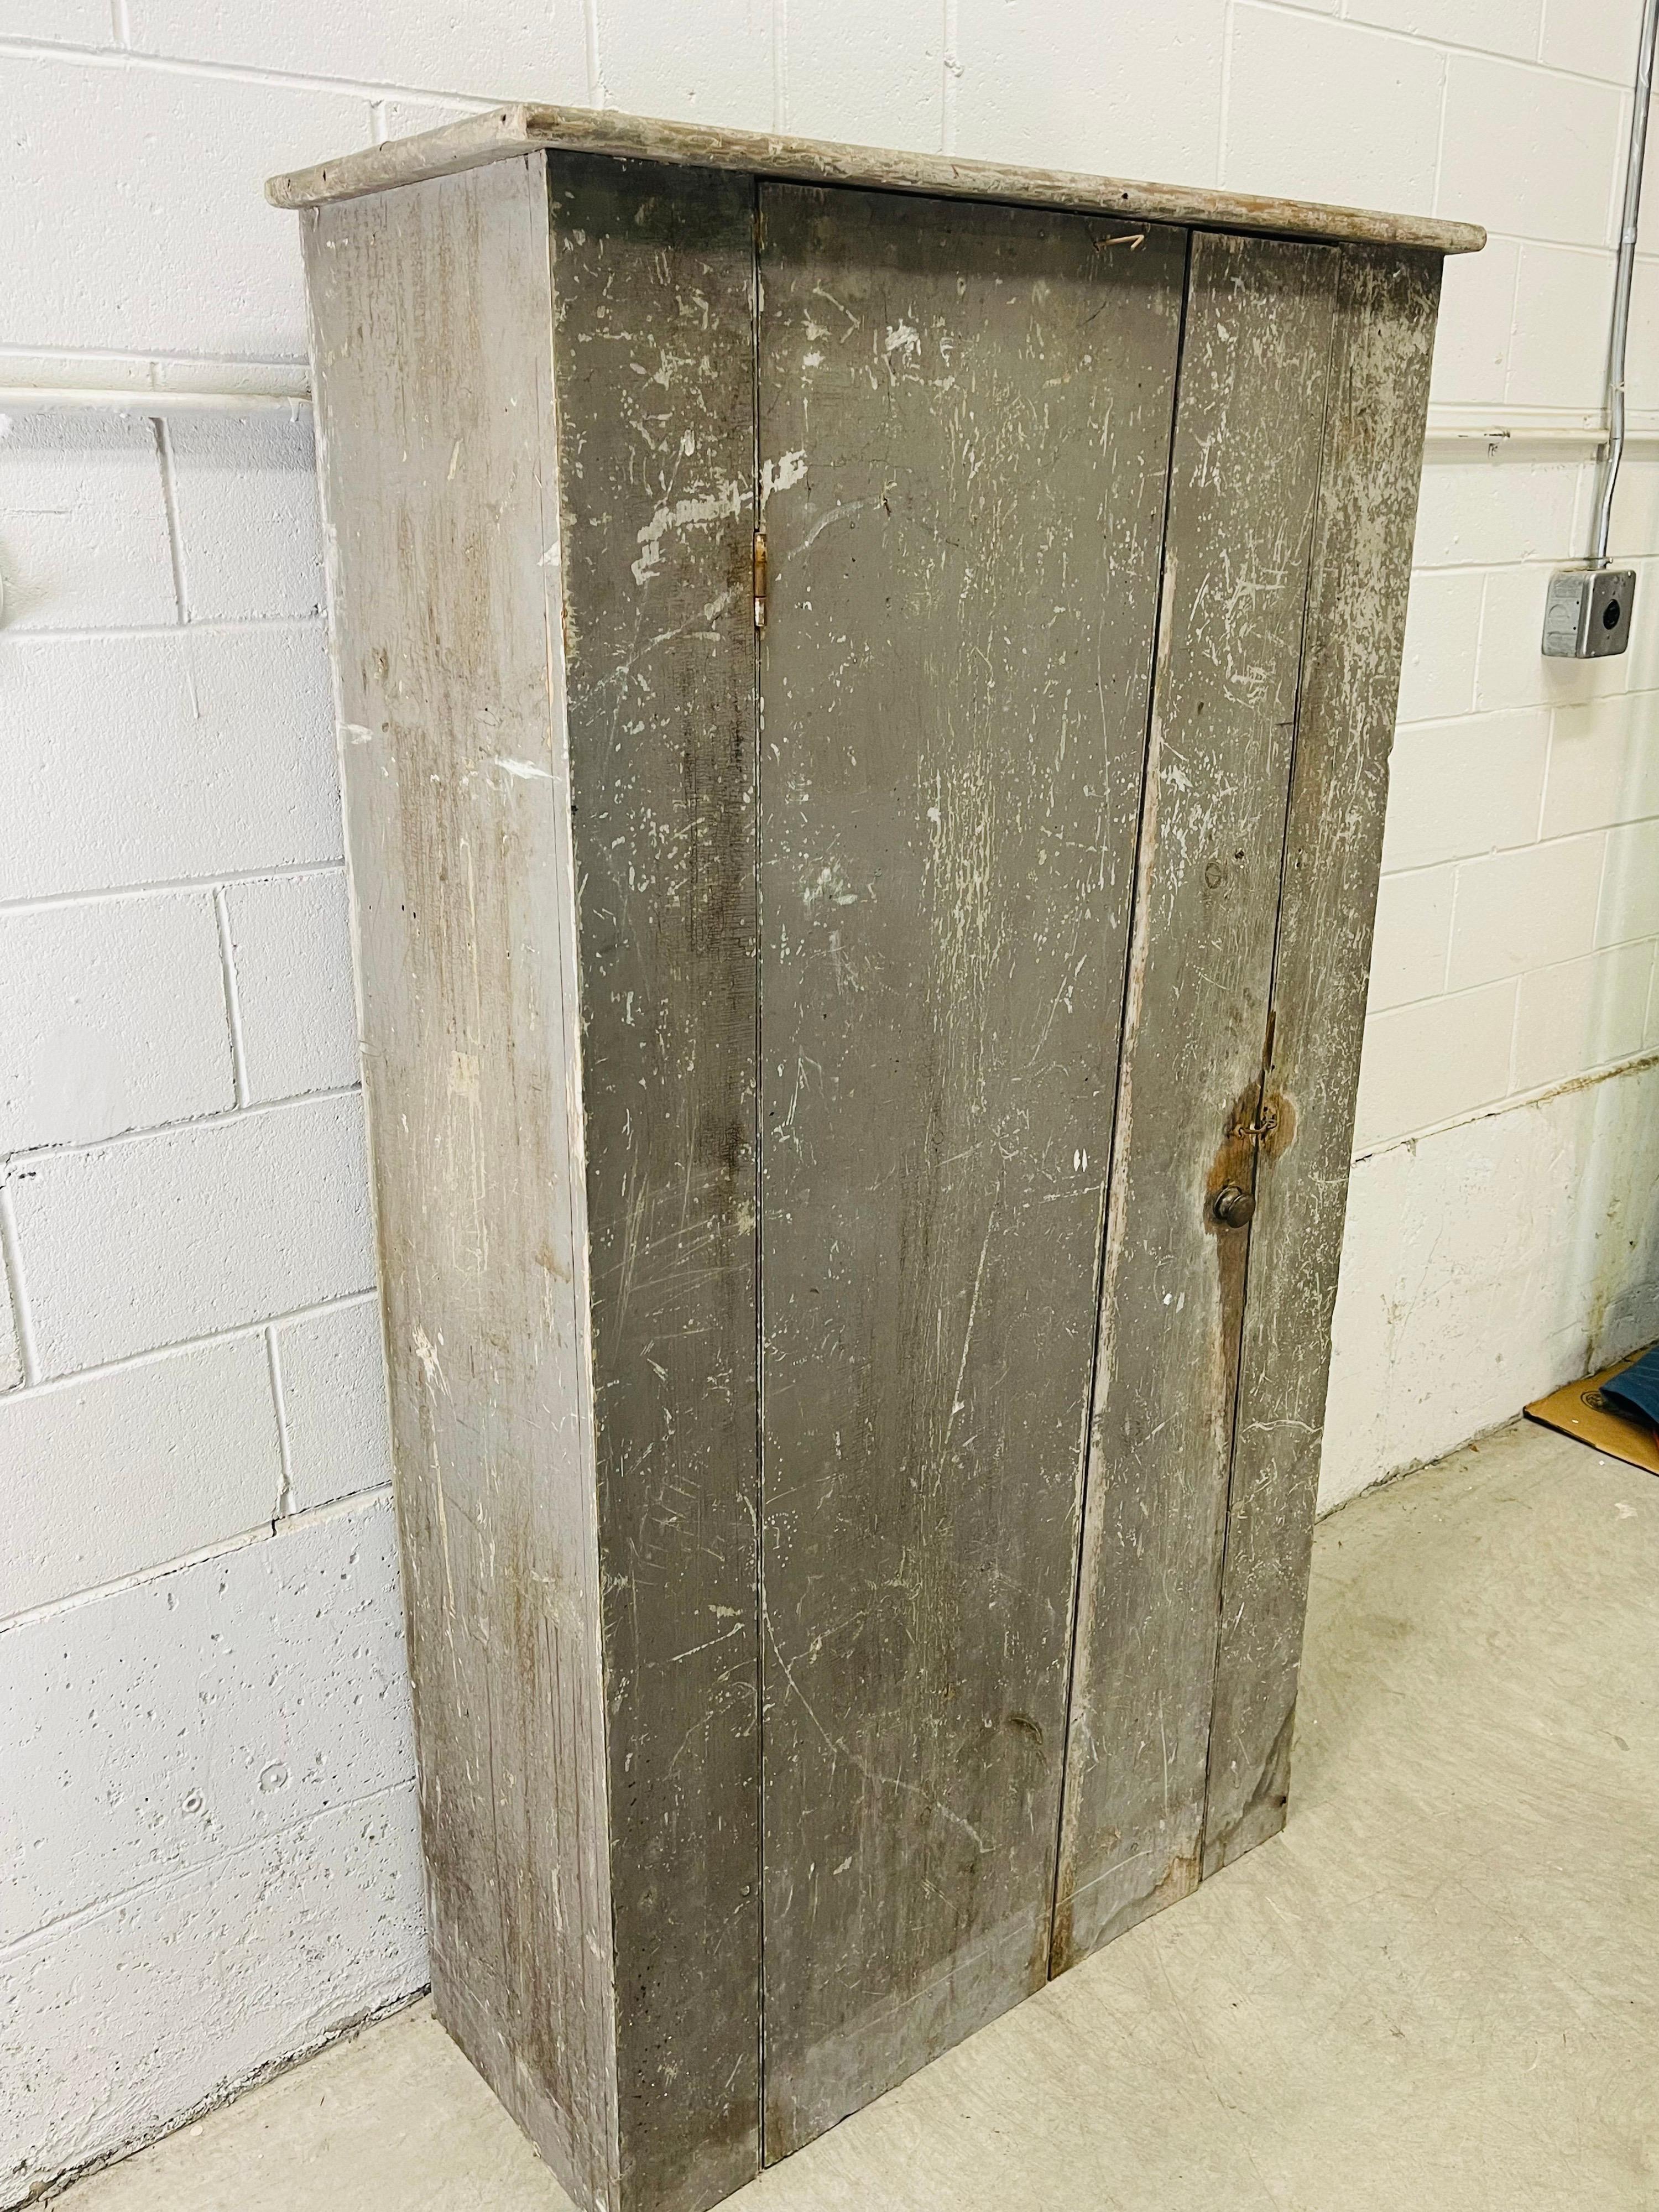 New England farmhouse rustic antique wood cupboard in original condition. The cupboard has the original paint and hardware. There was never a back on the cupboard because it would have been built into a wall. There is only one hinge on the door